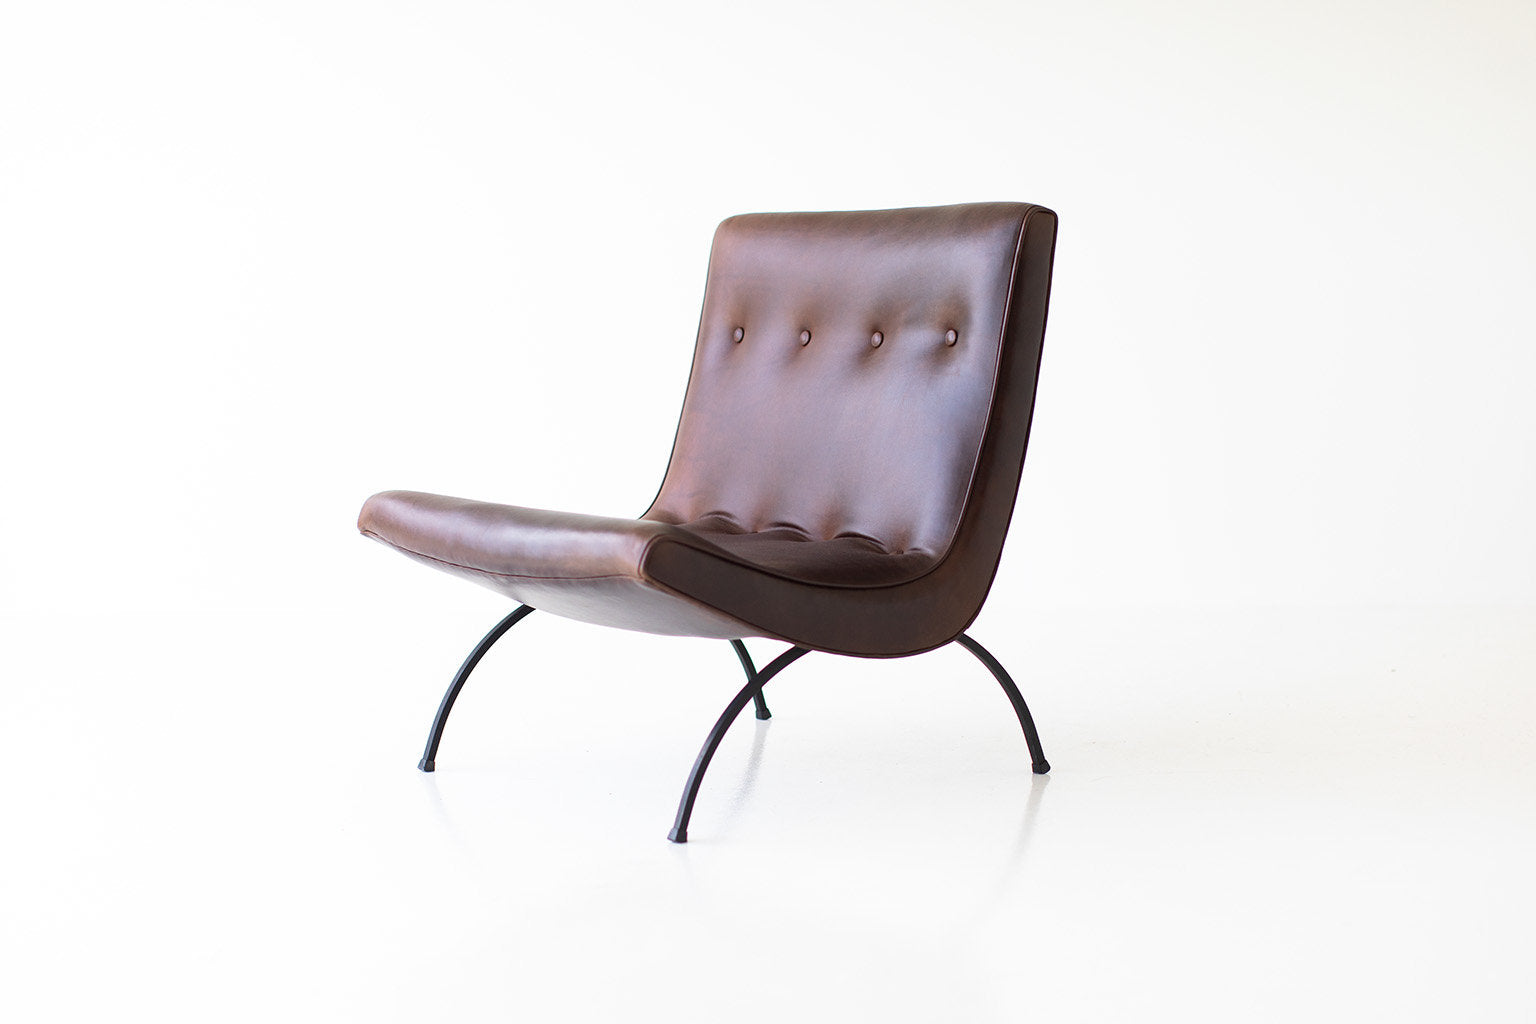 Milo Baughman Leather Scoop Lounge Chair for Thayer Coggin - 06041802